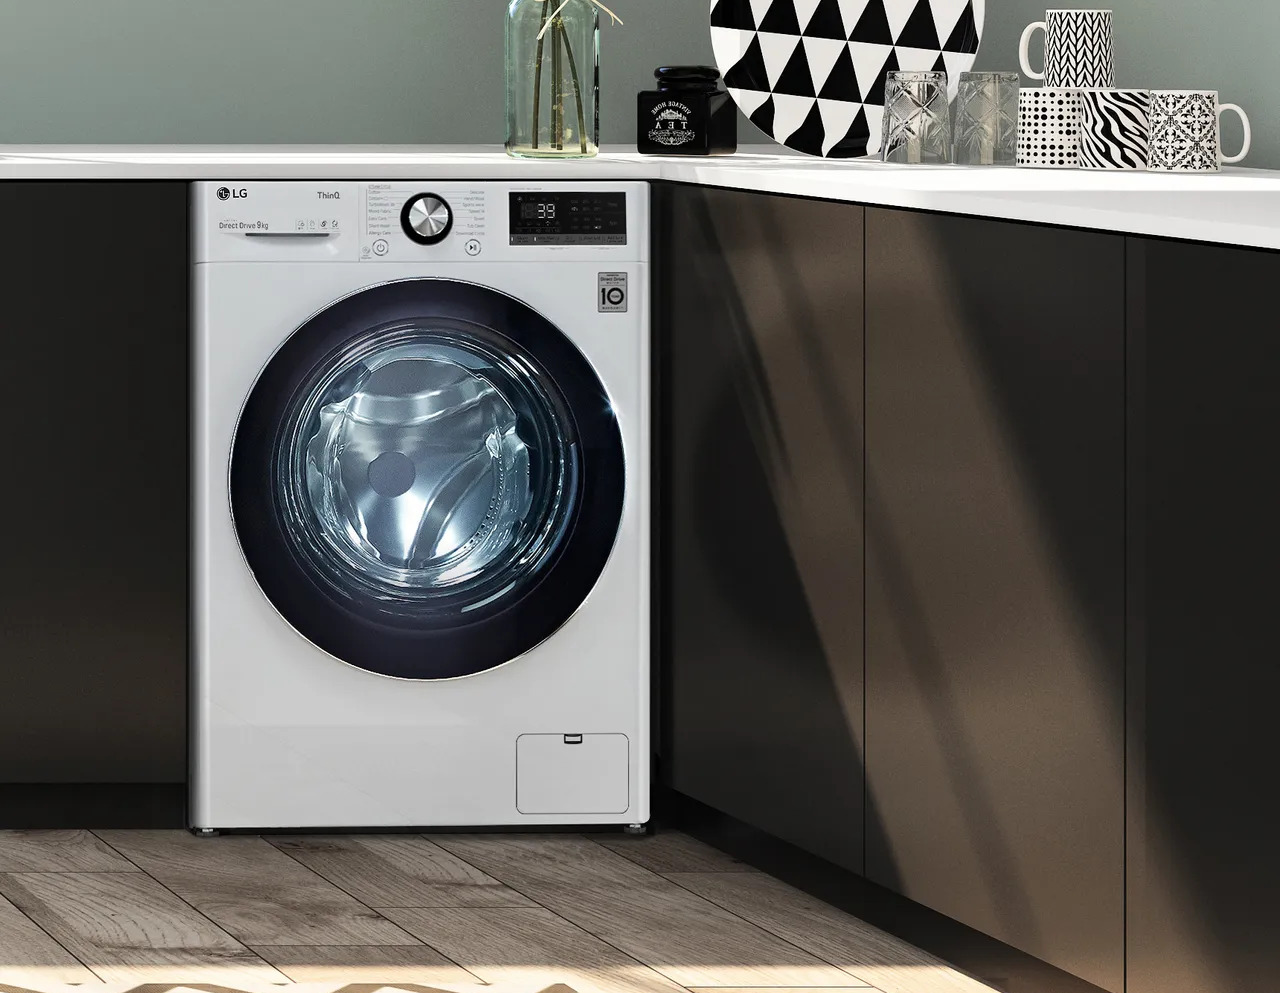 Samsung Washer E3 Code: A Troubleshooting Guide